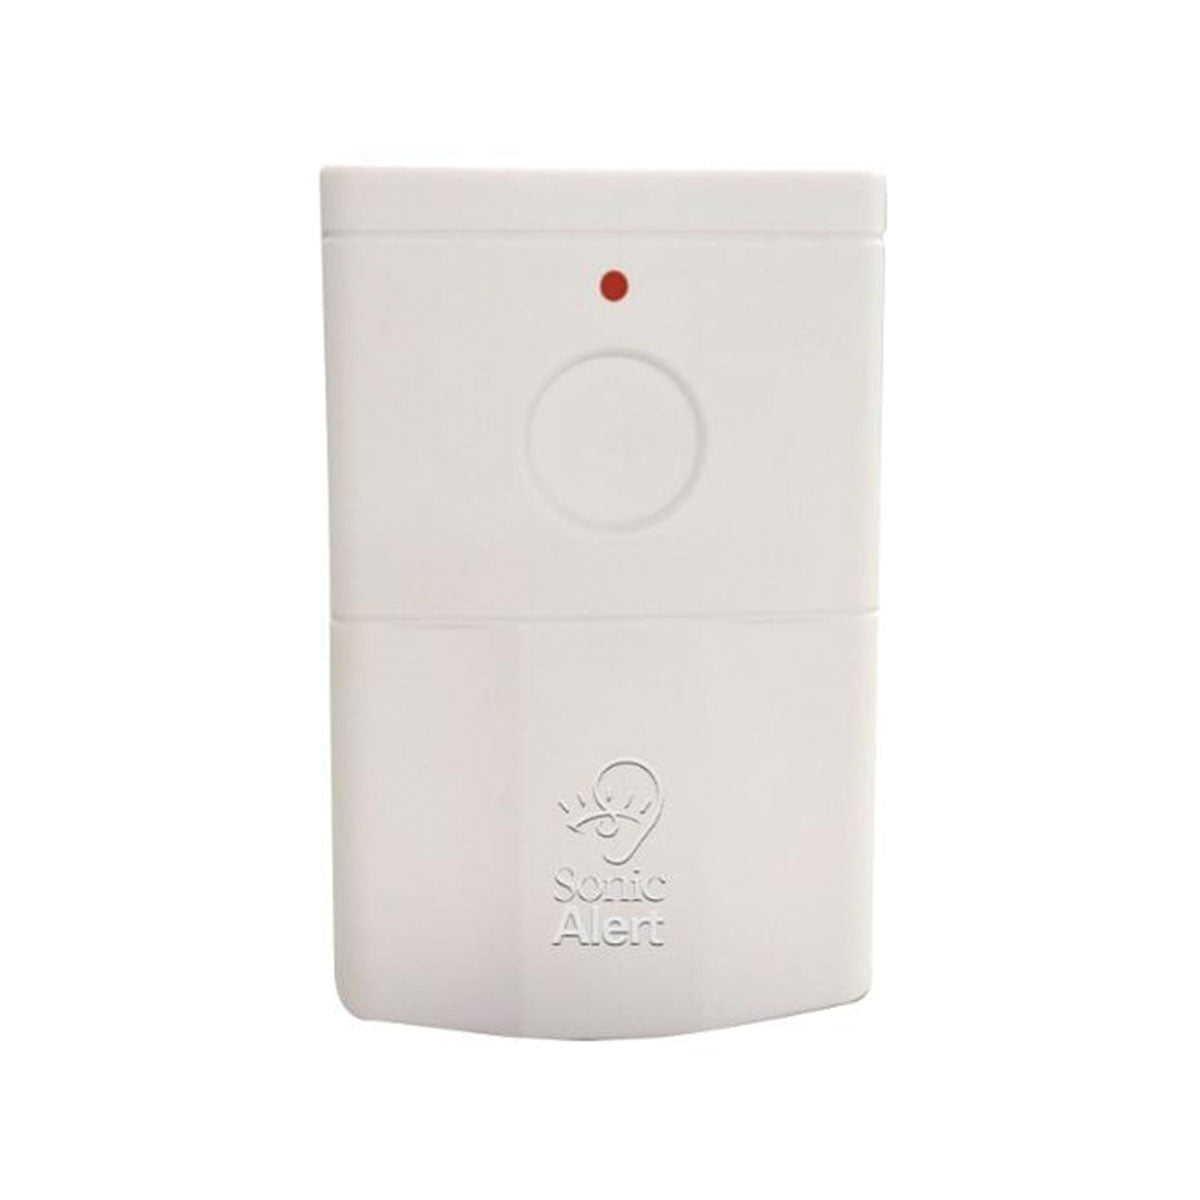 The HomeAware Transmitter HA360SSSCK Smoke and Carbon Monoxide (CO) Sound  (Optional Accessory) by Sonic Alert